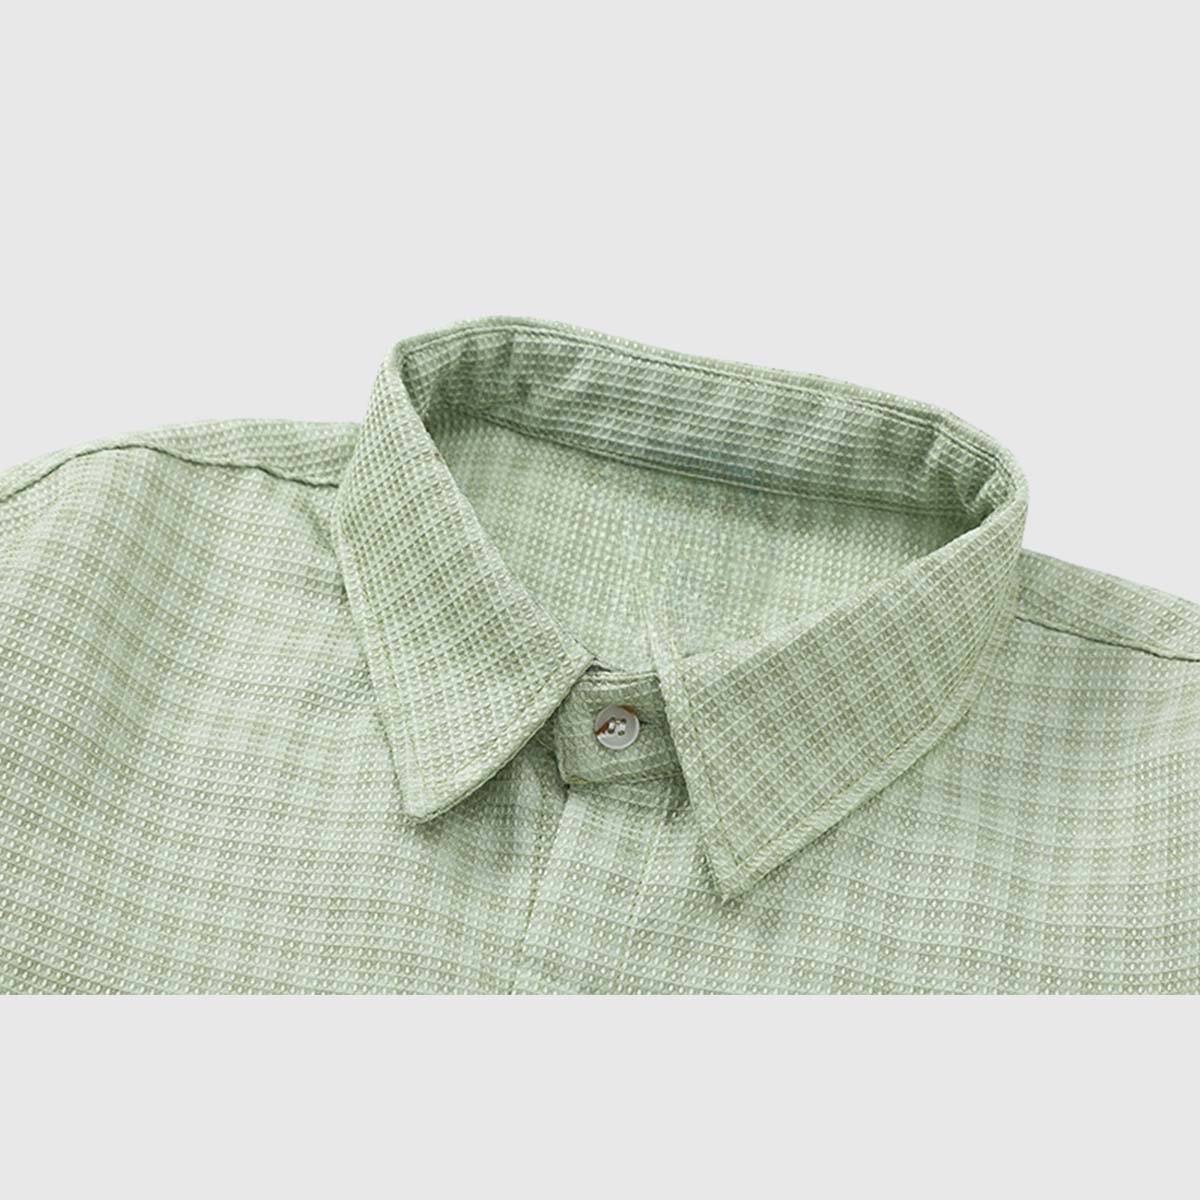 Textured Gingham Casual Shirt